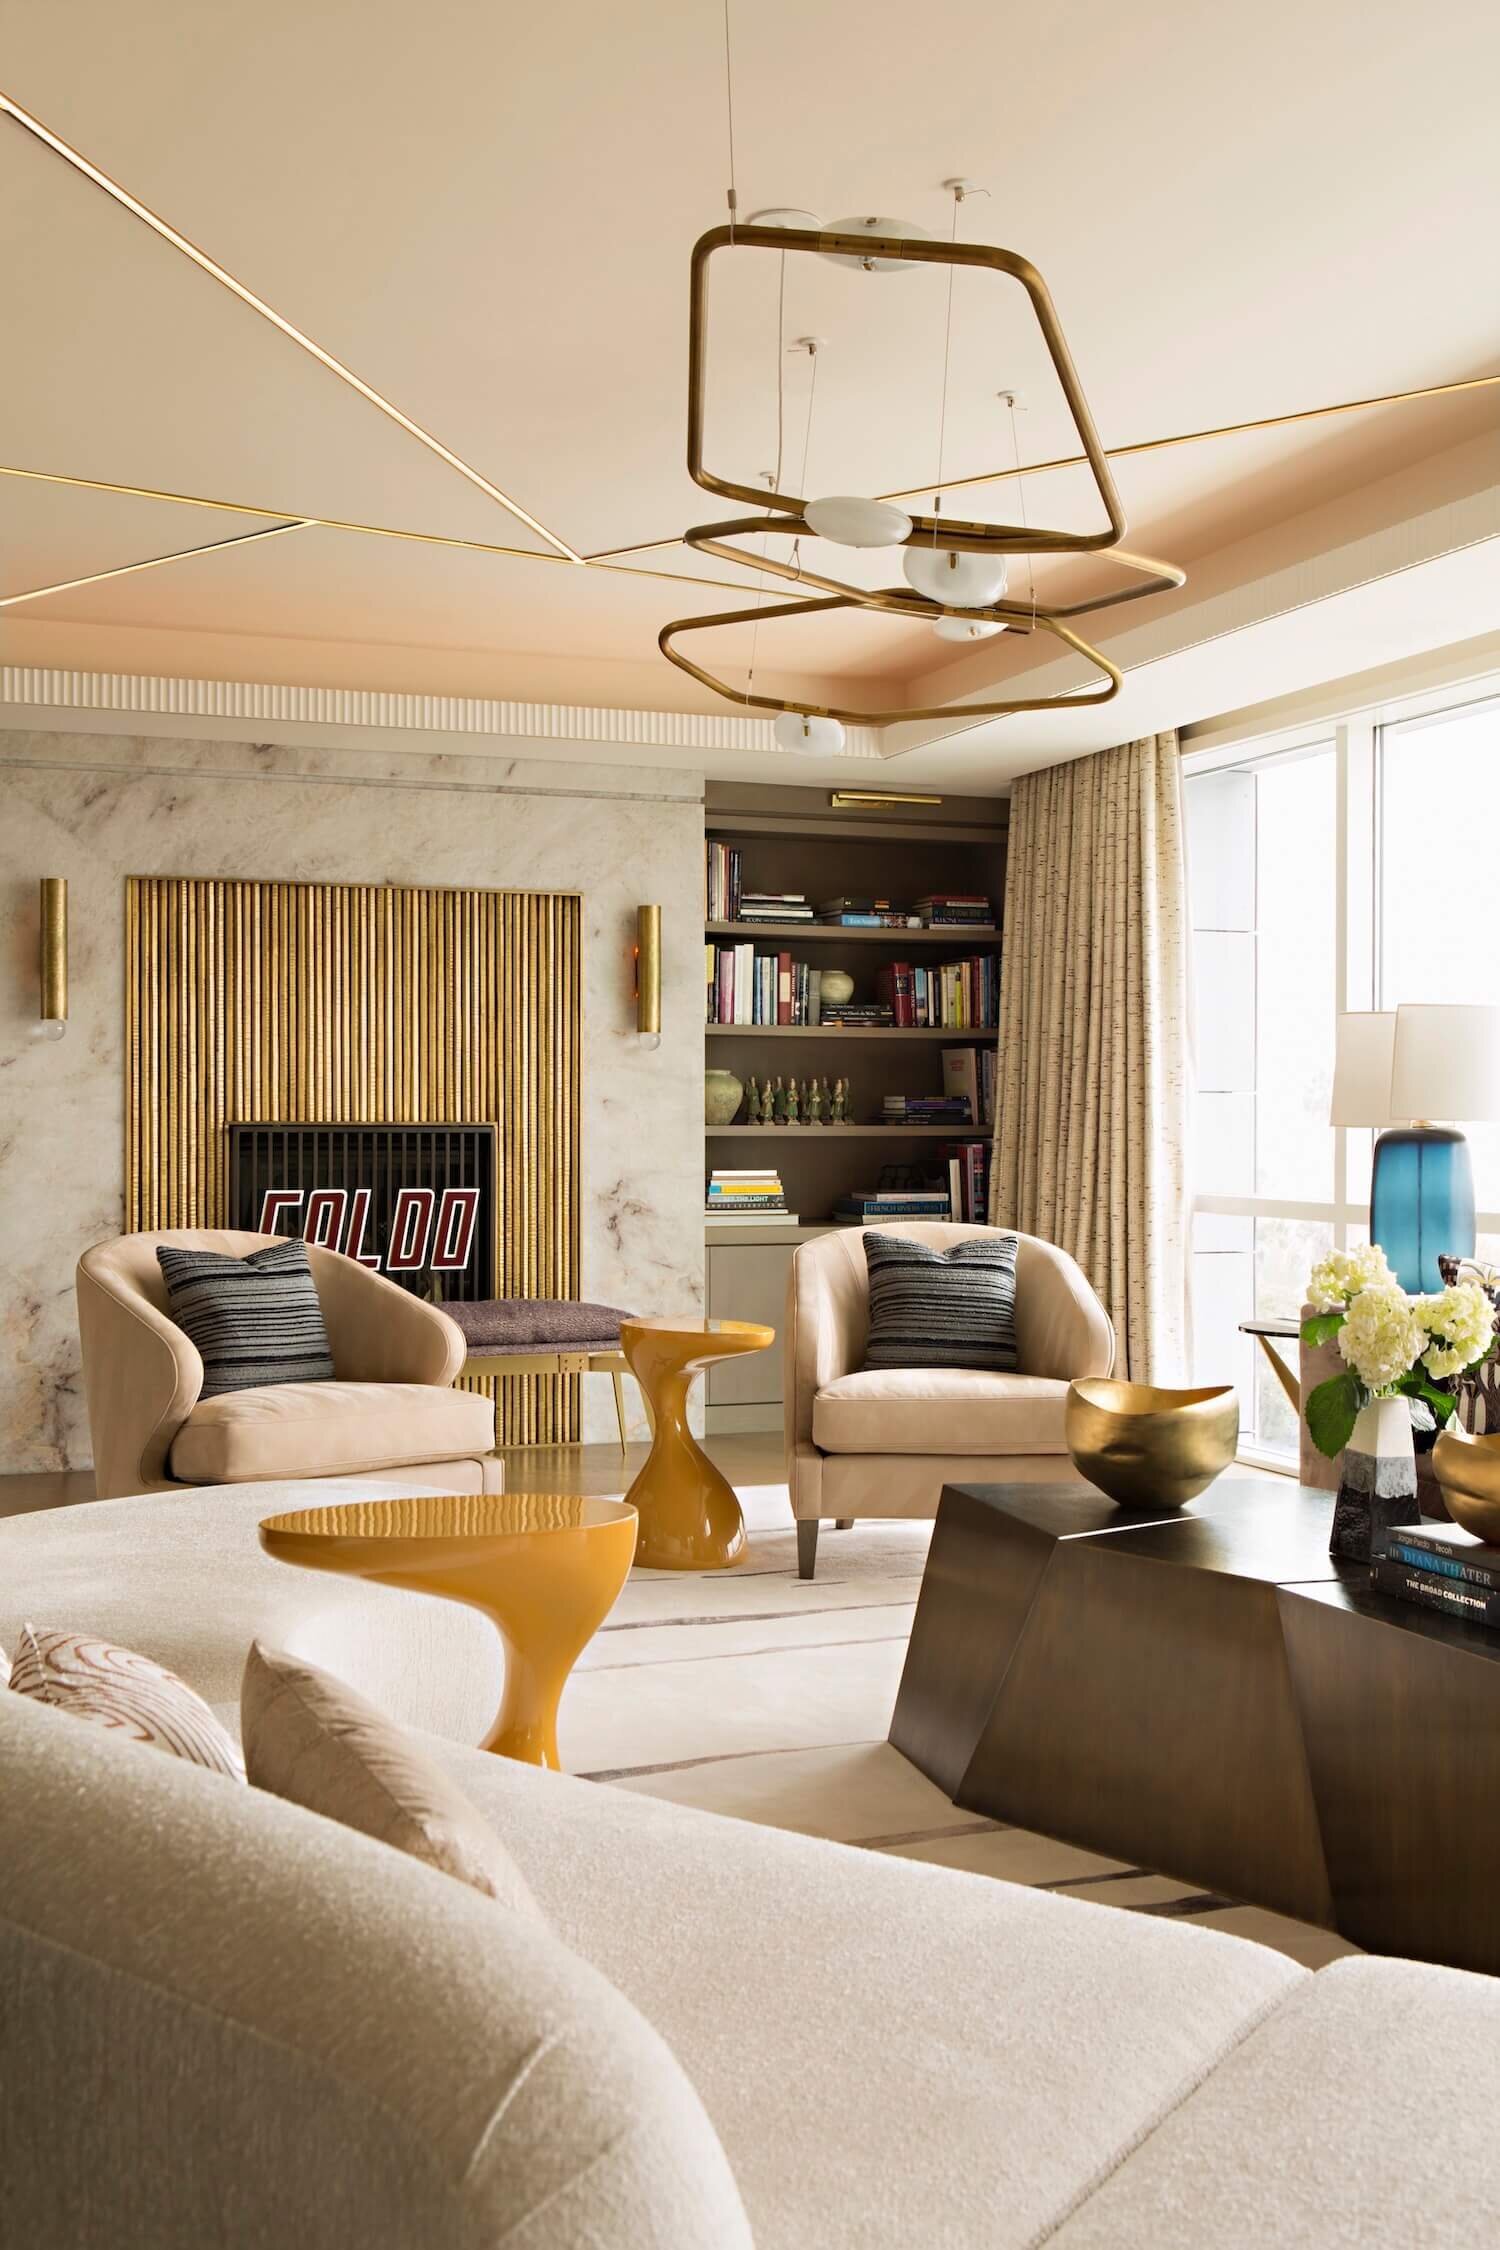 The Living Room features space area with a a hammered brass mantle, vibrant contemporary furnishing with and drapery.